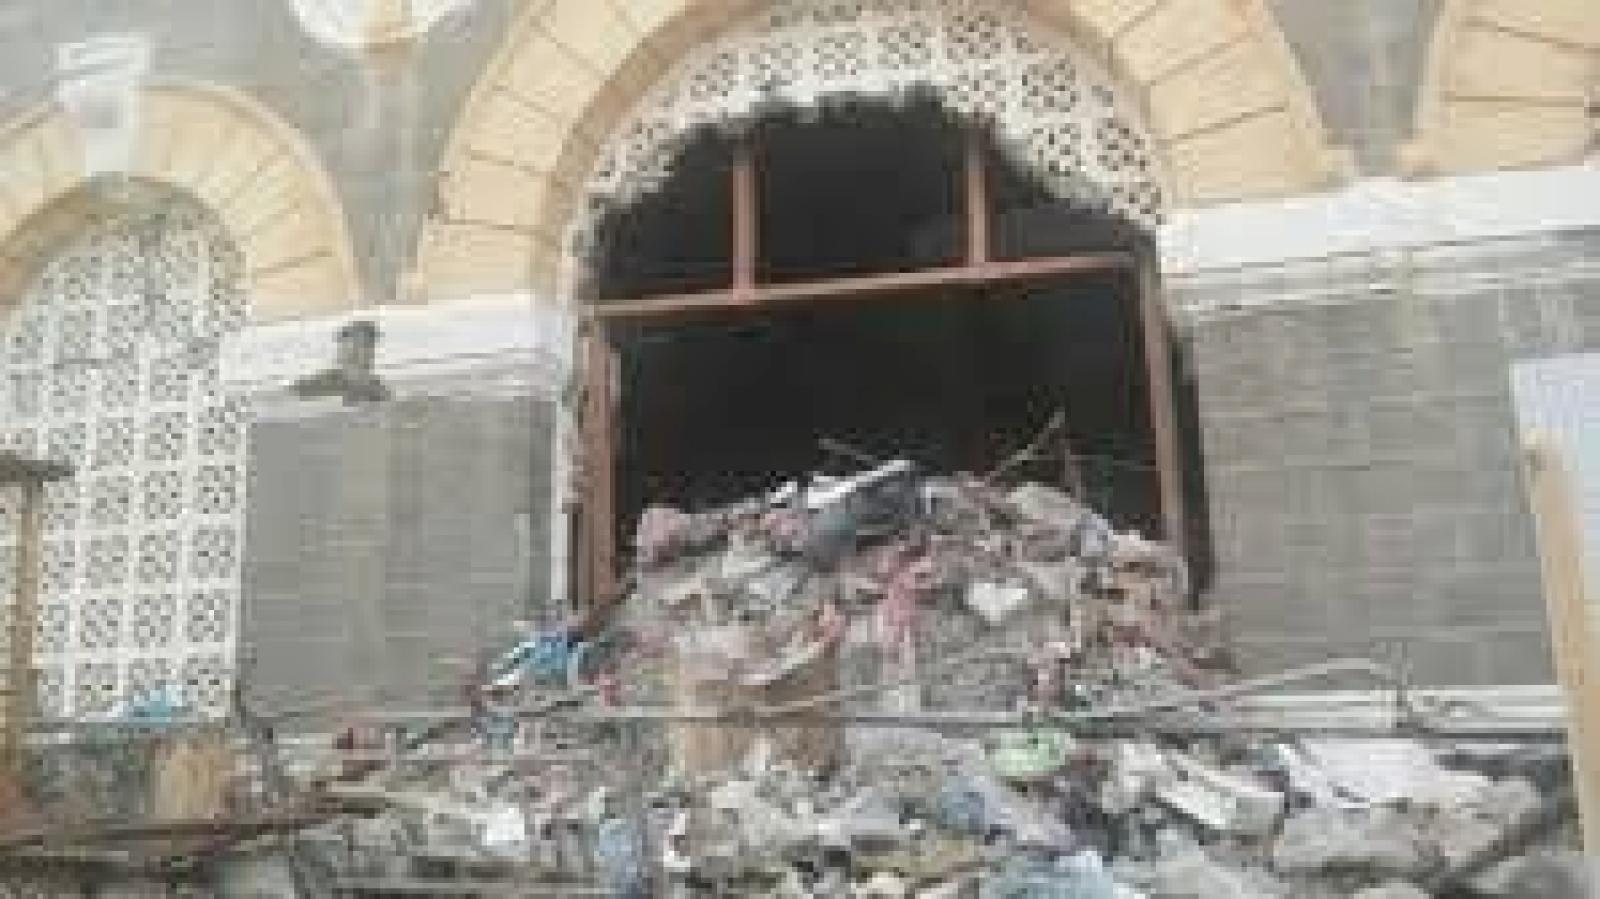 Parts of the ruins of the Aden Military Museum building, Al-Mushahid Website, 28 July 2017